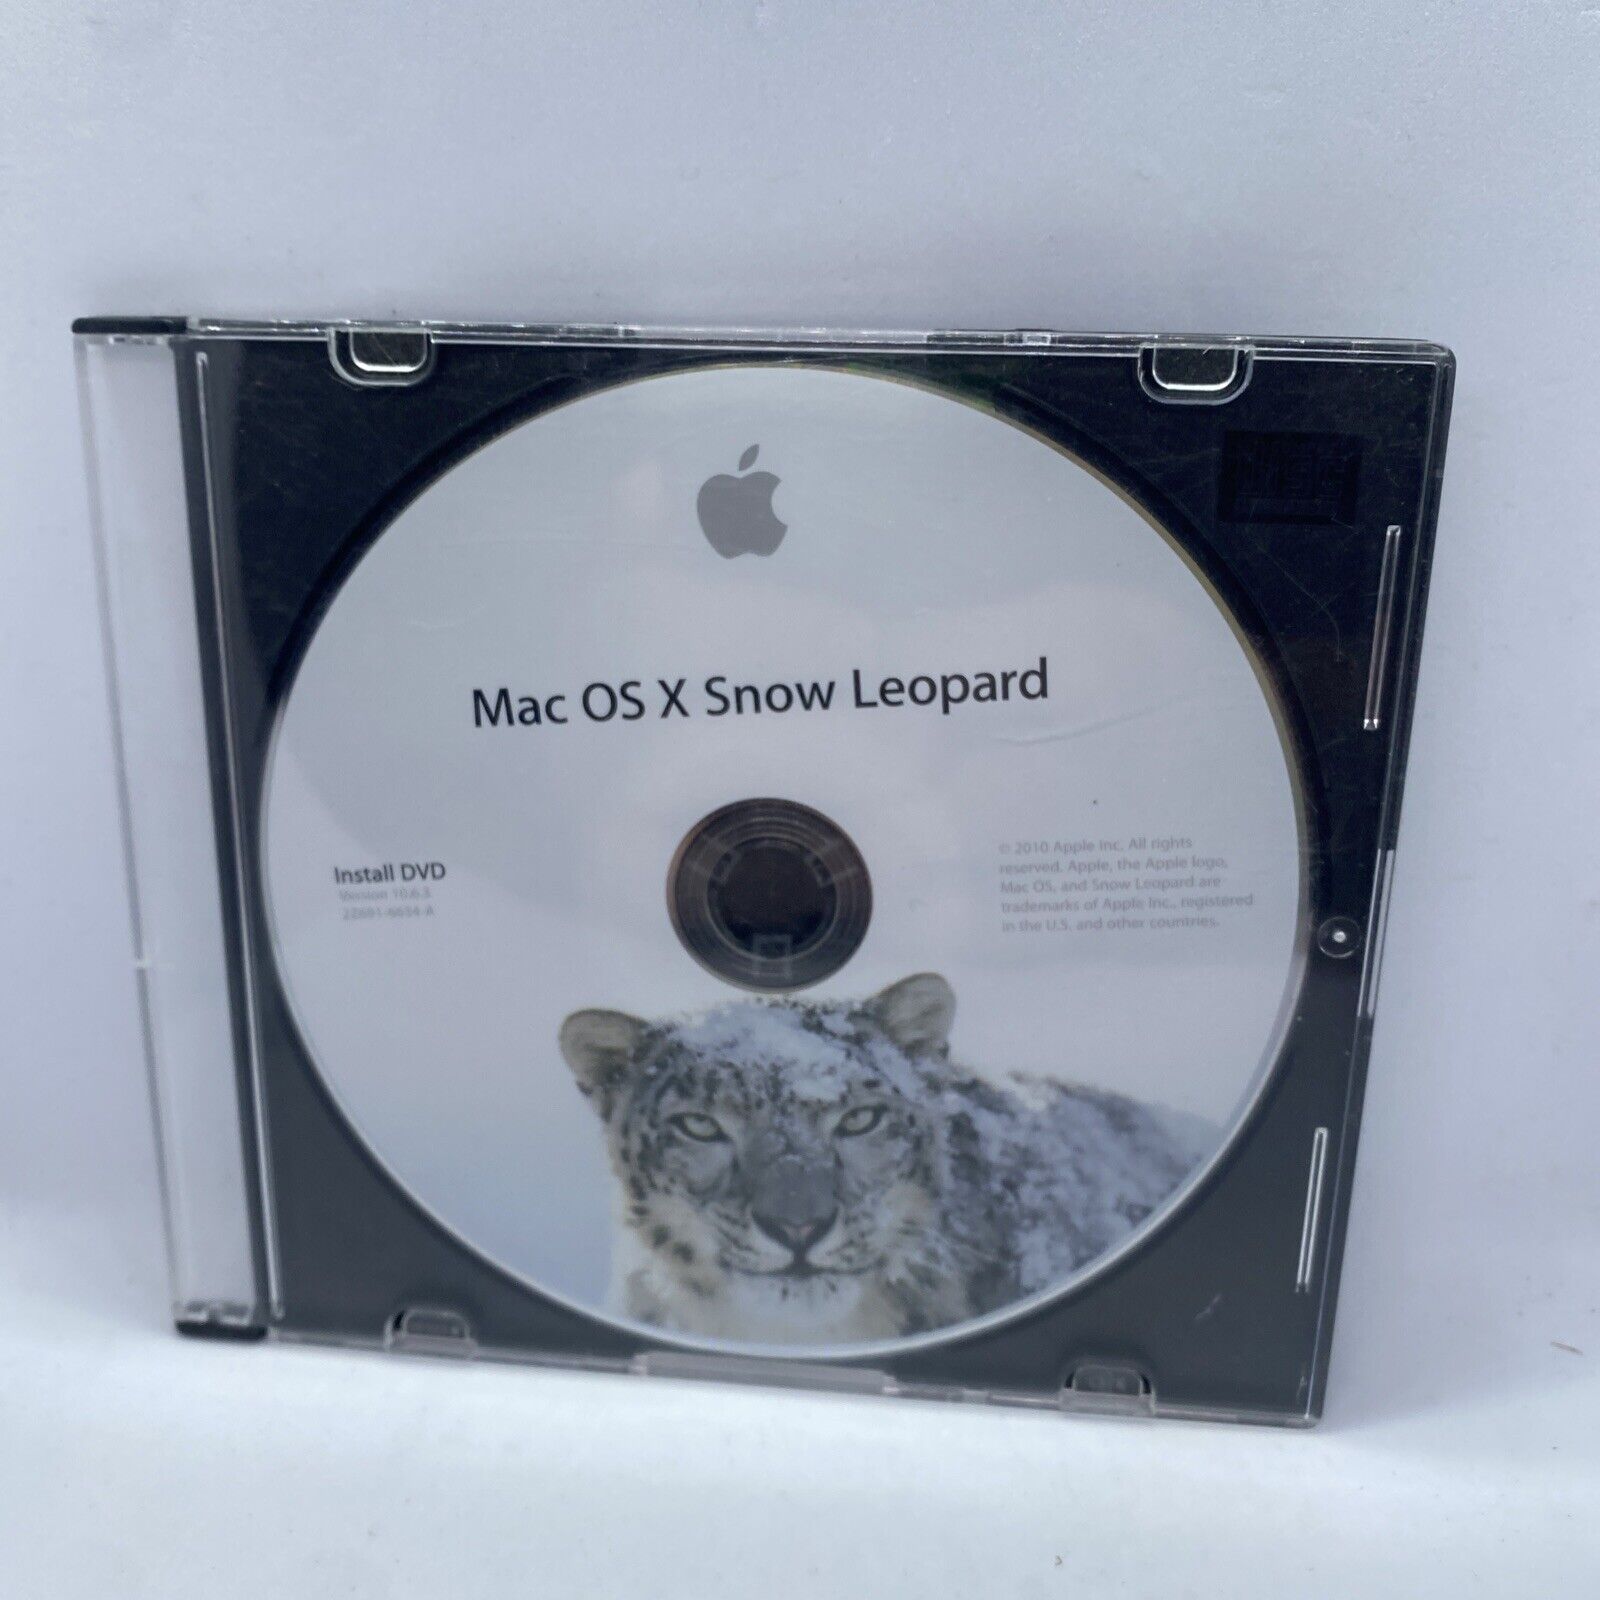 Apple Mac OS X Snow Leopard 10.6.3 Install DVD Disc - Flawless Clean Disc Only